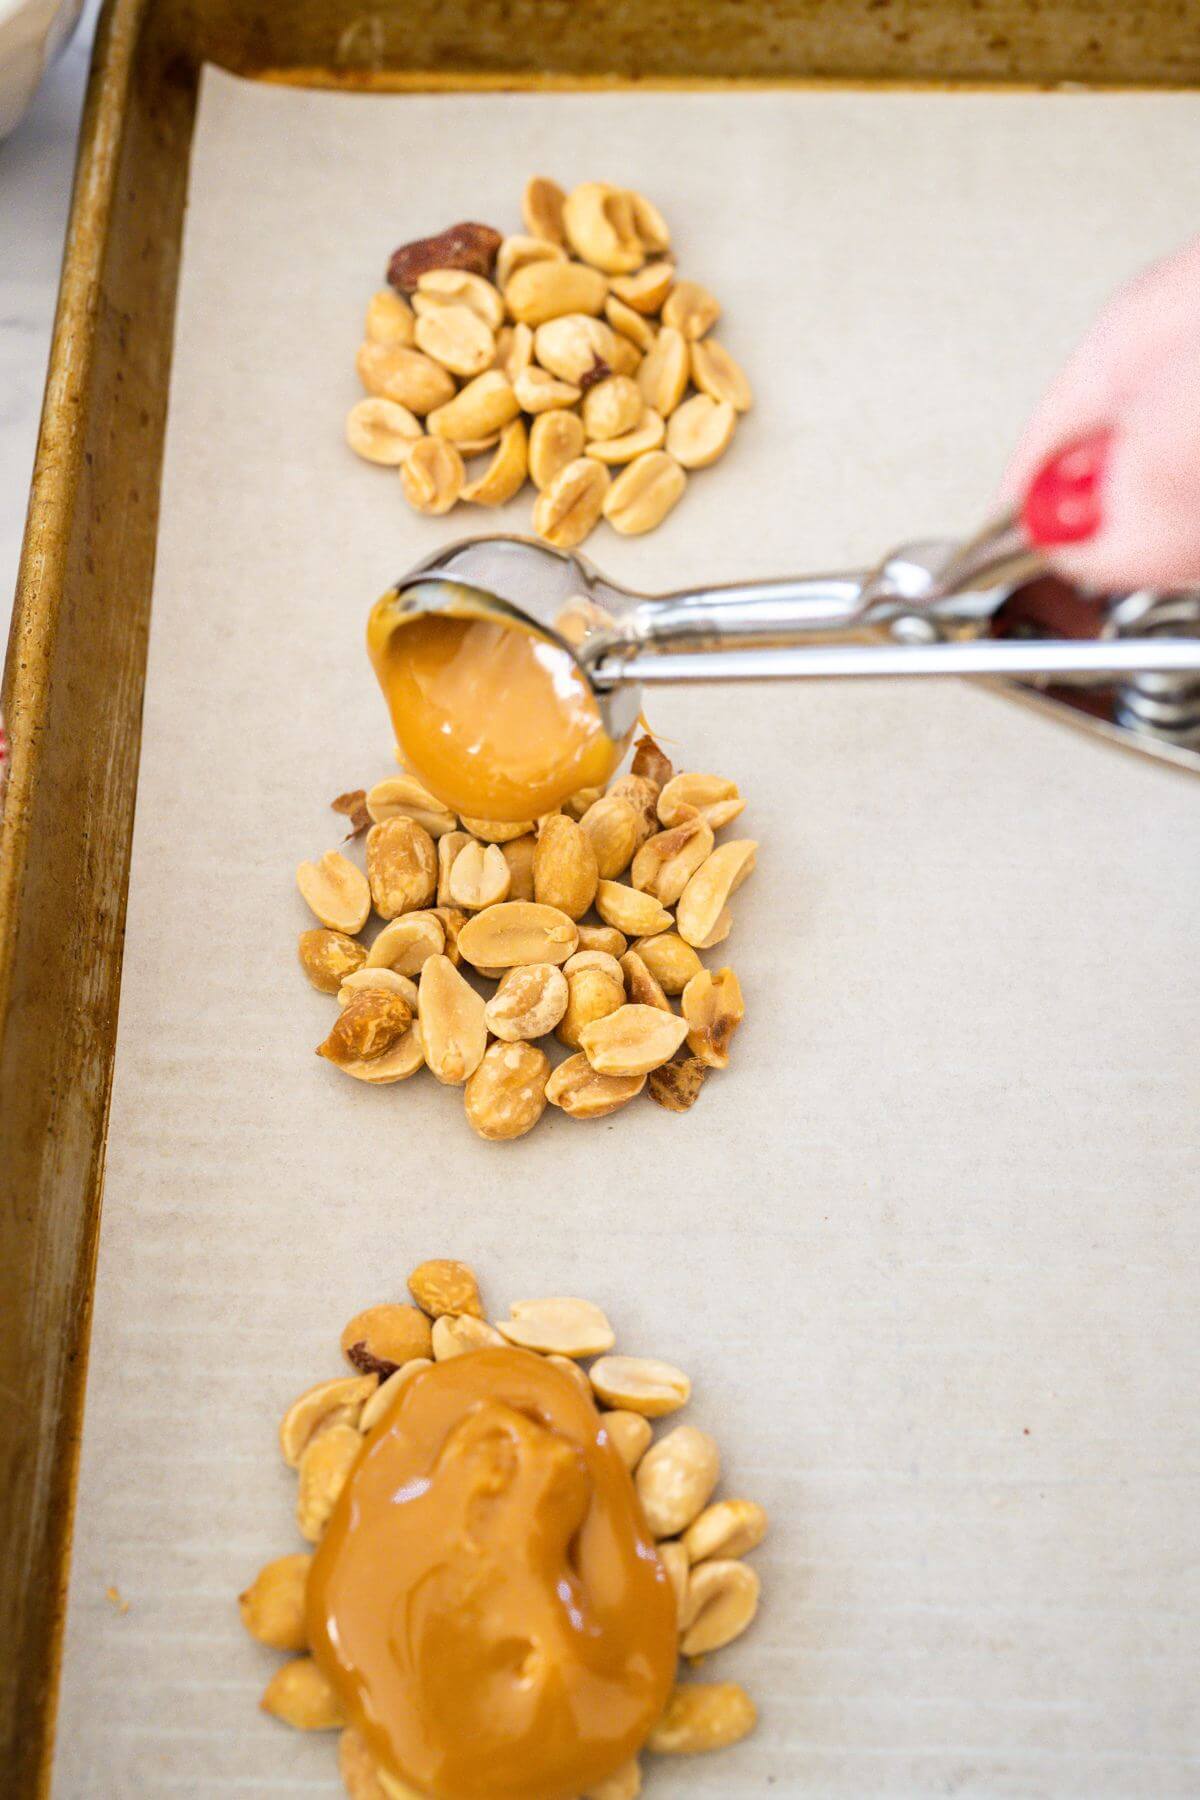 A cookie scoop pours caramel mix on top of peanuts on a baking sheet.